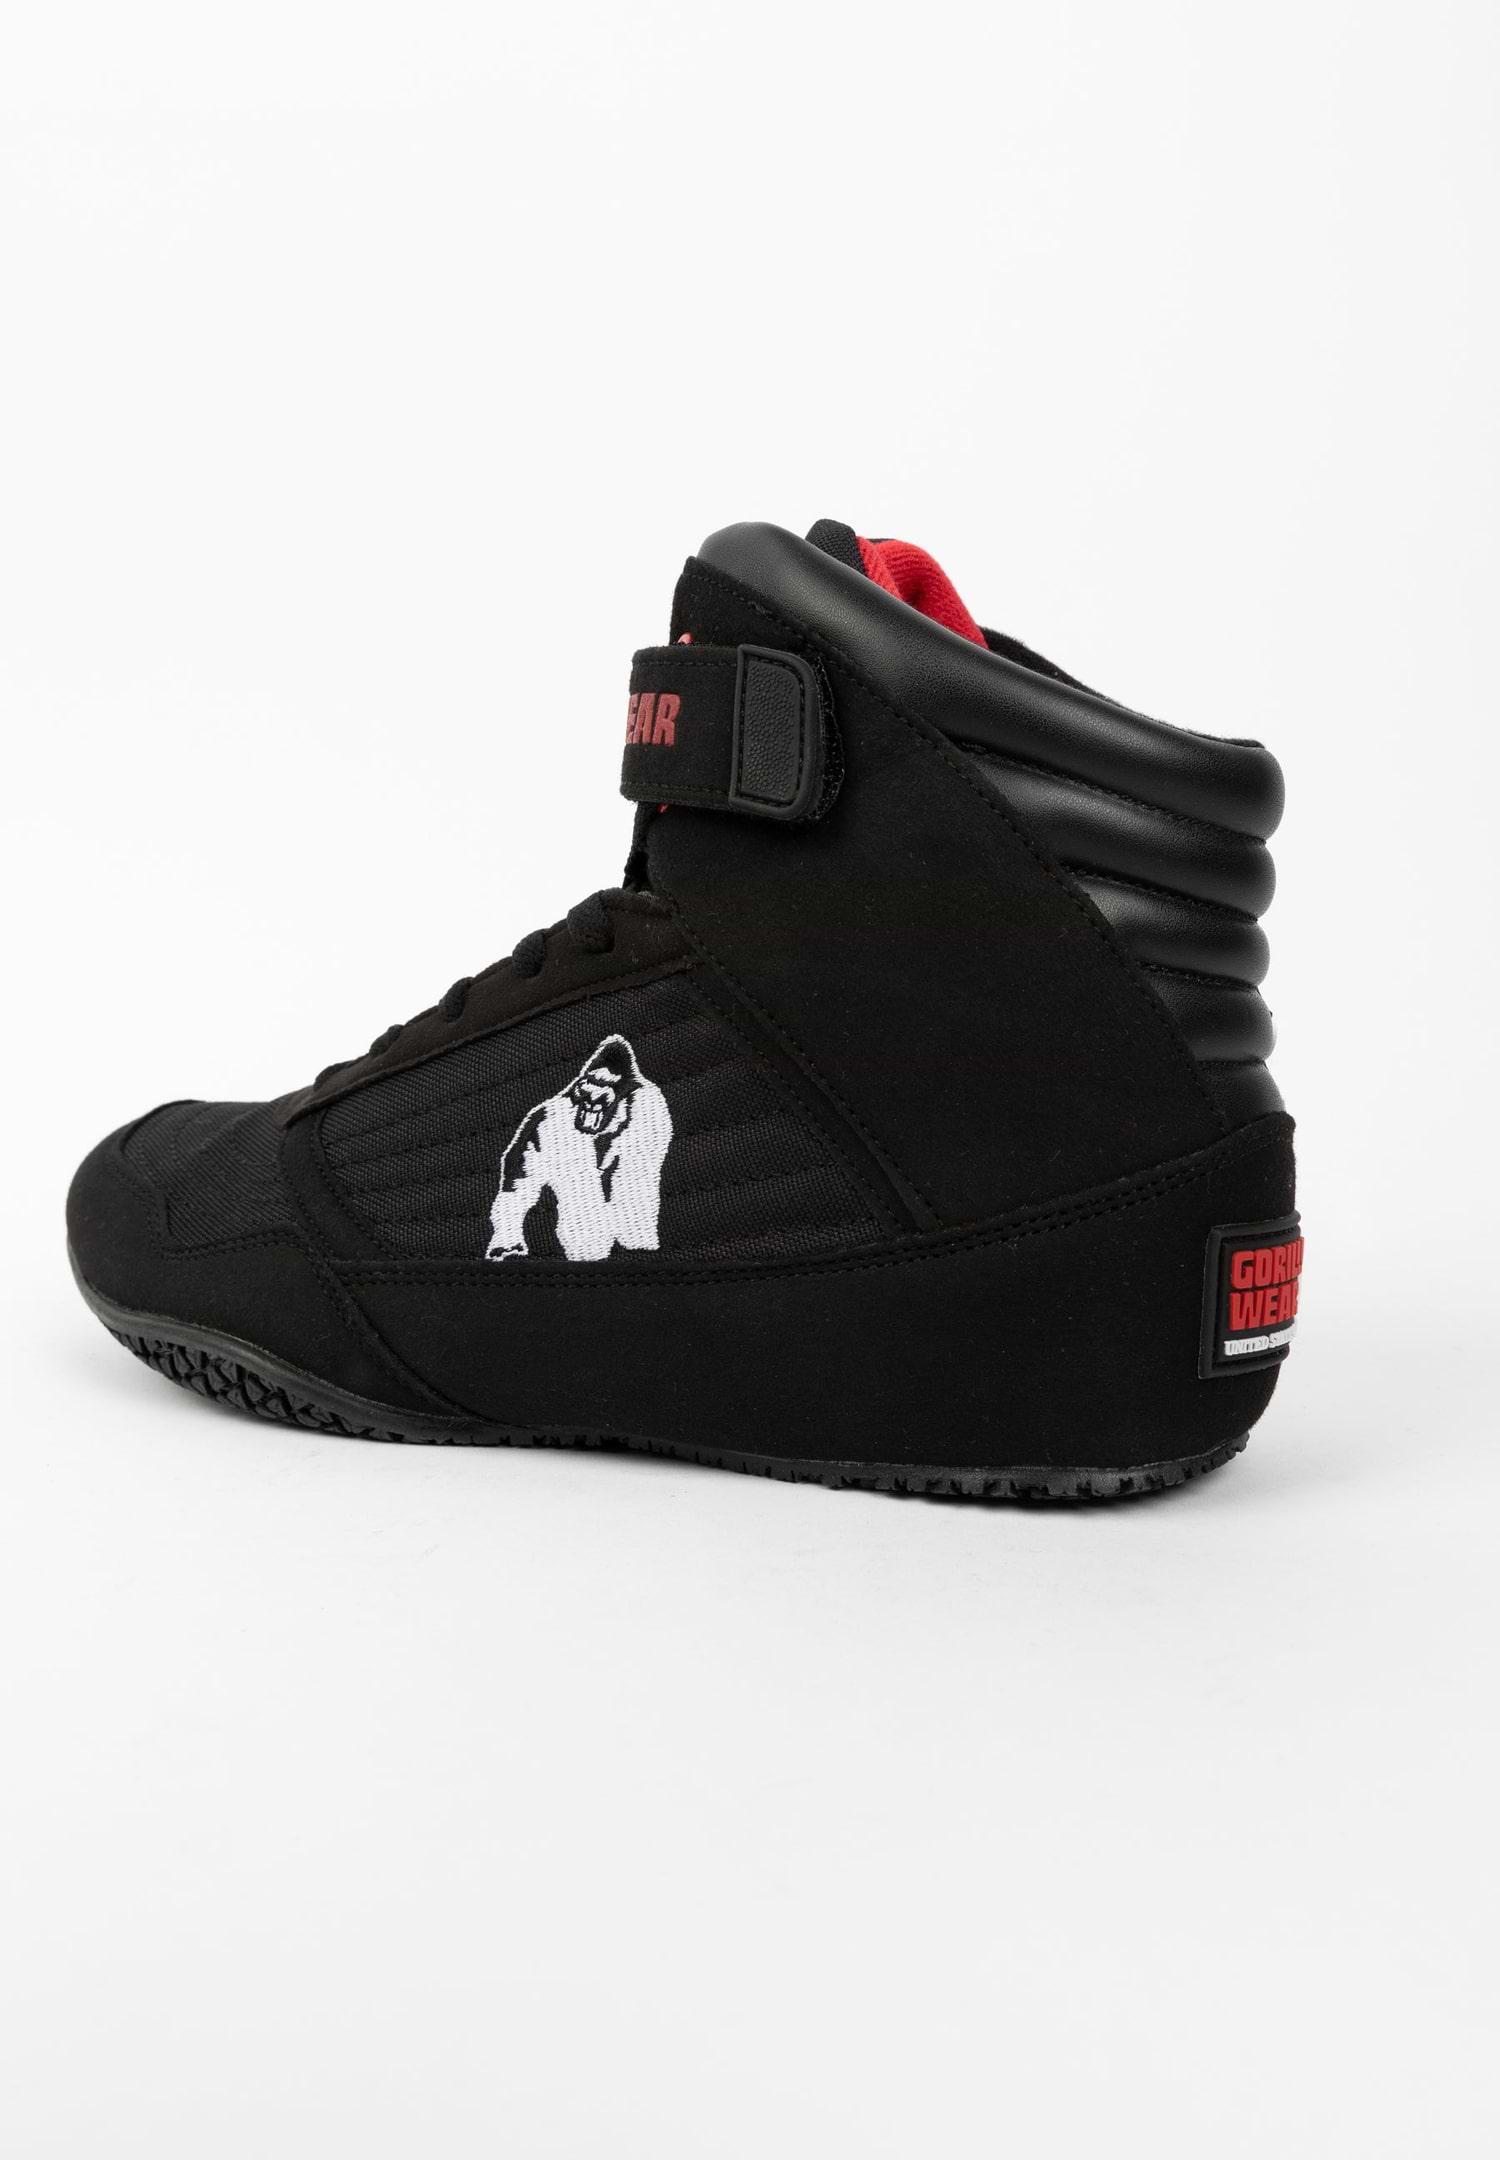 Gorilla Wear High Tops - Black Weightlifting Shoes